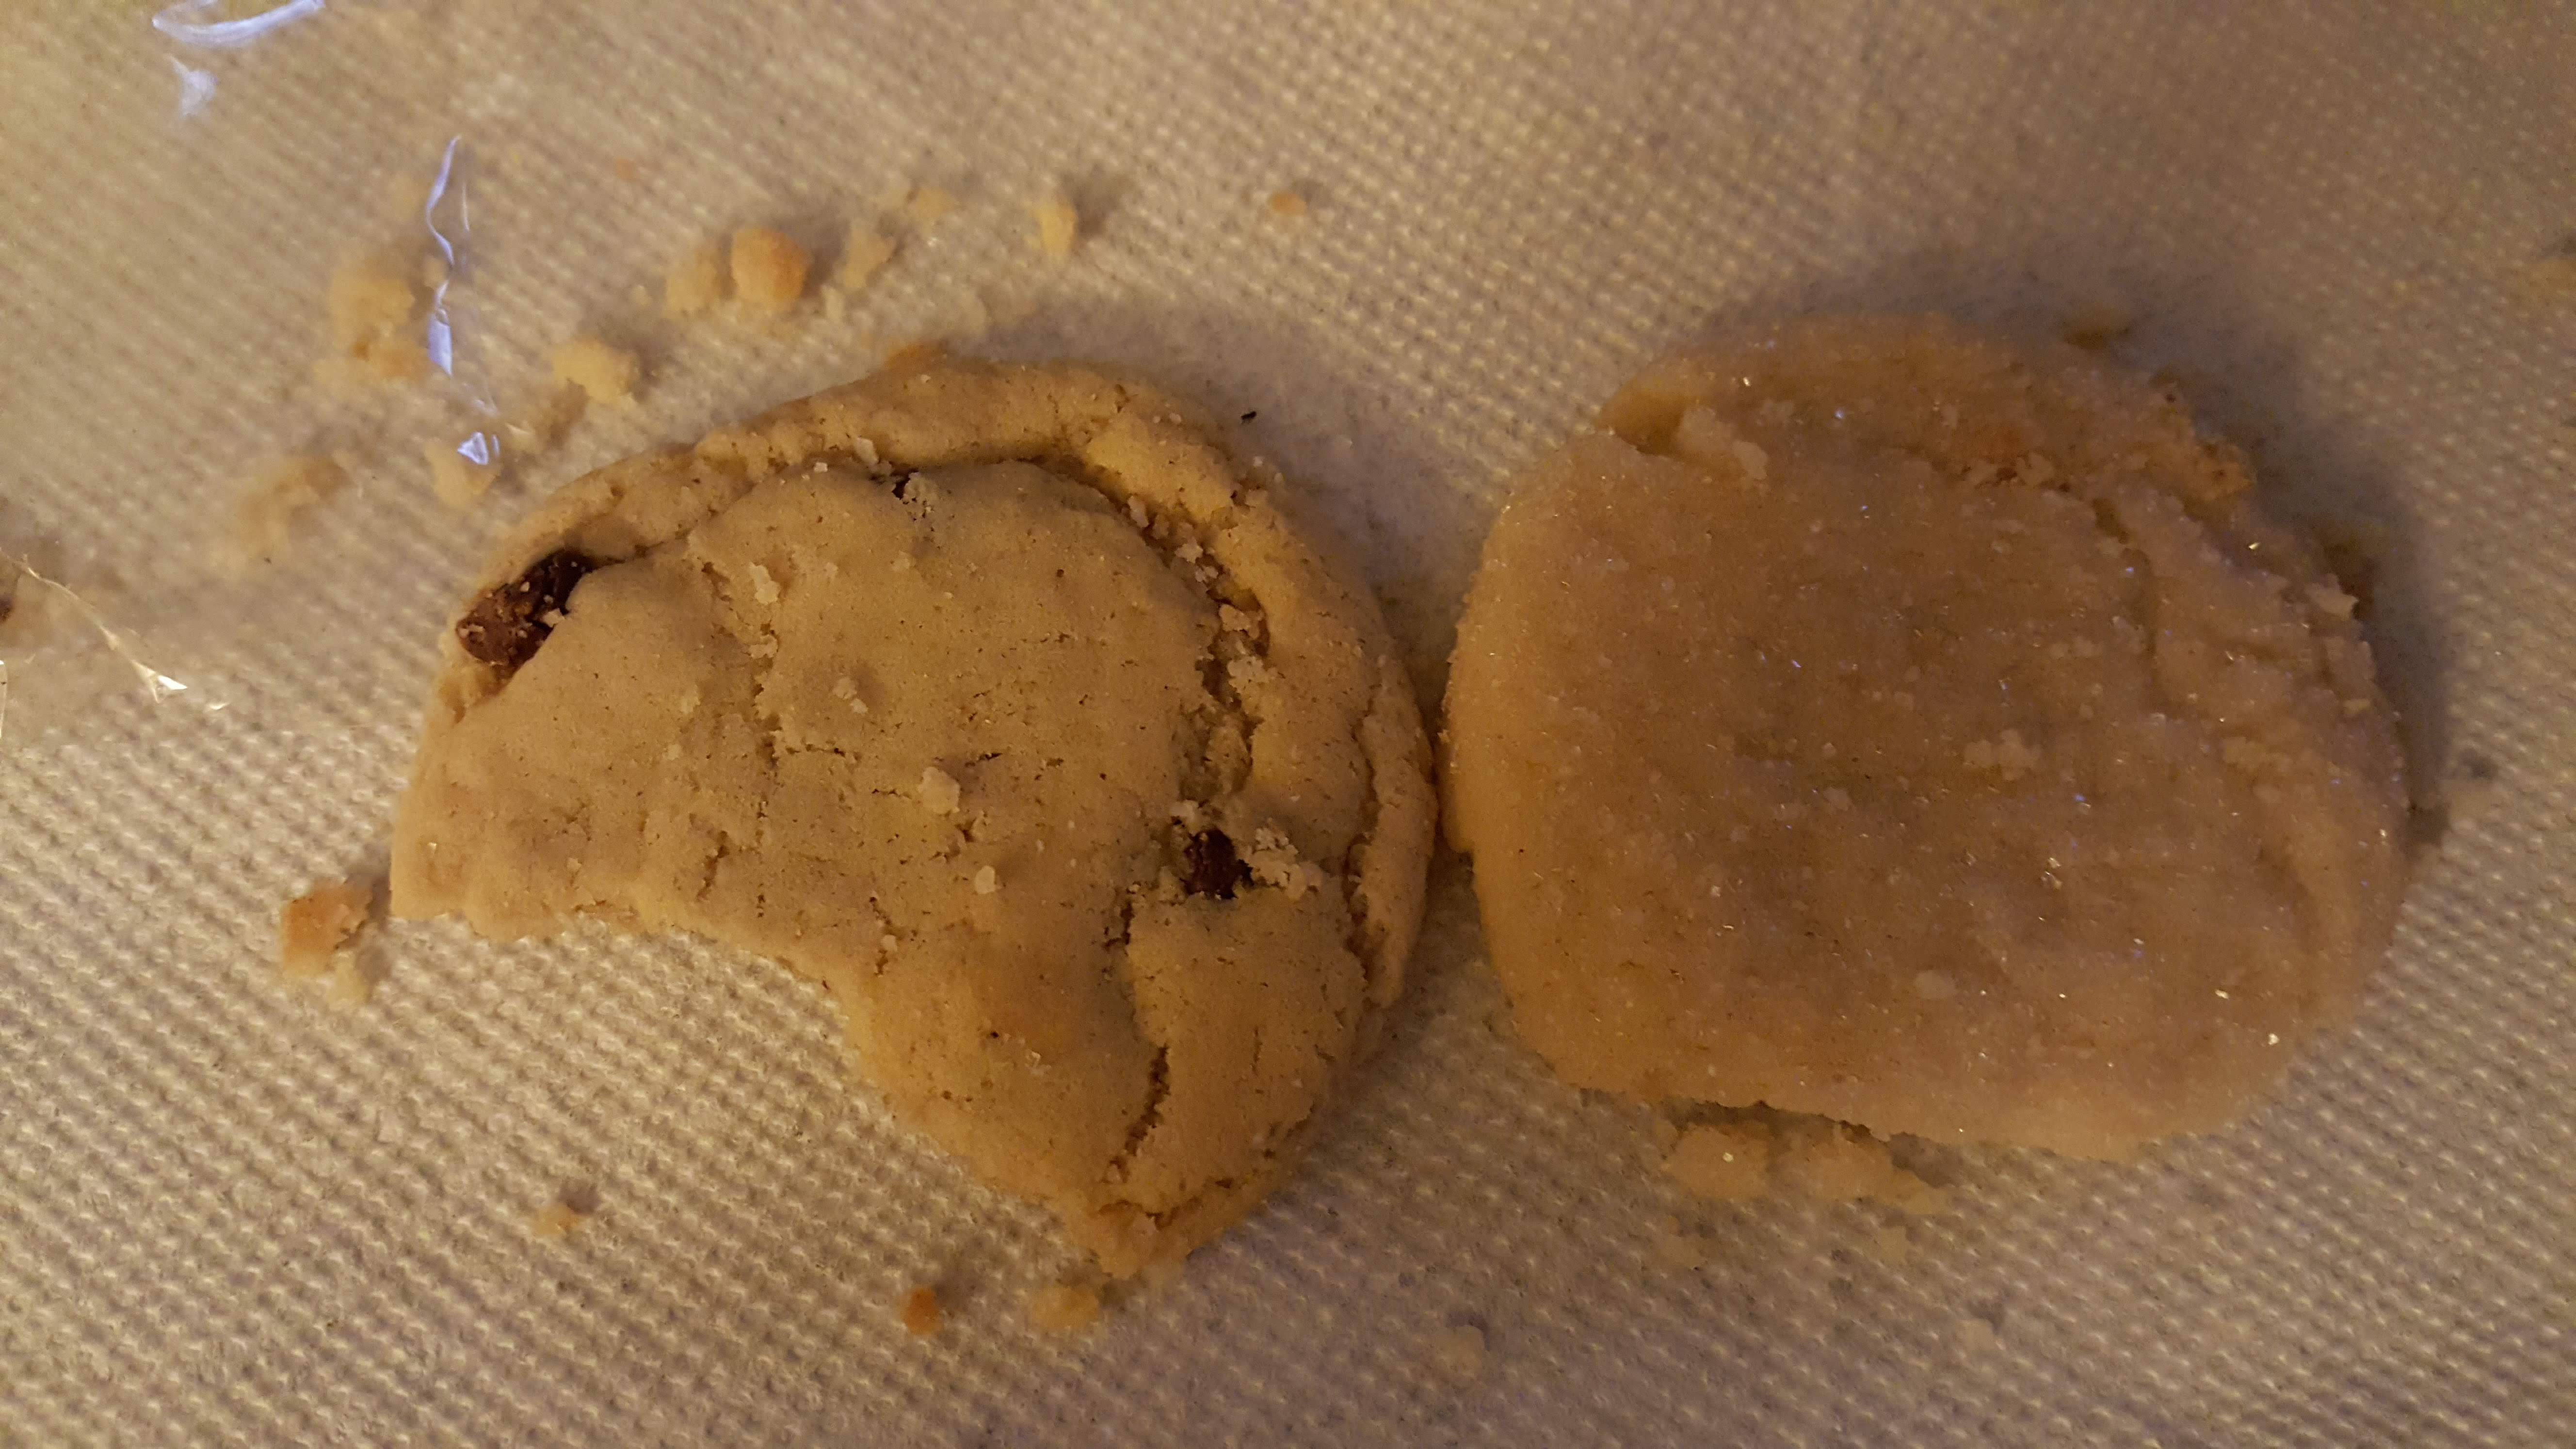 The Uptown Vegan - Chocolate Chip and Sugar Cookies